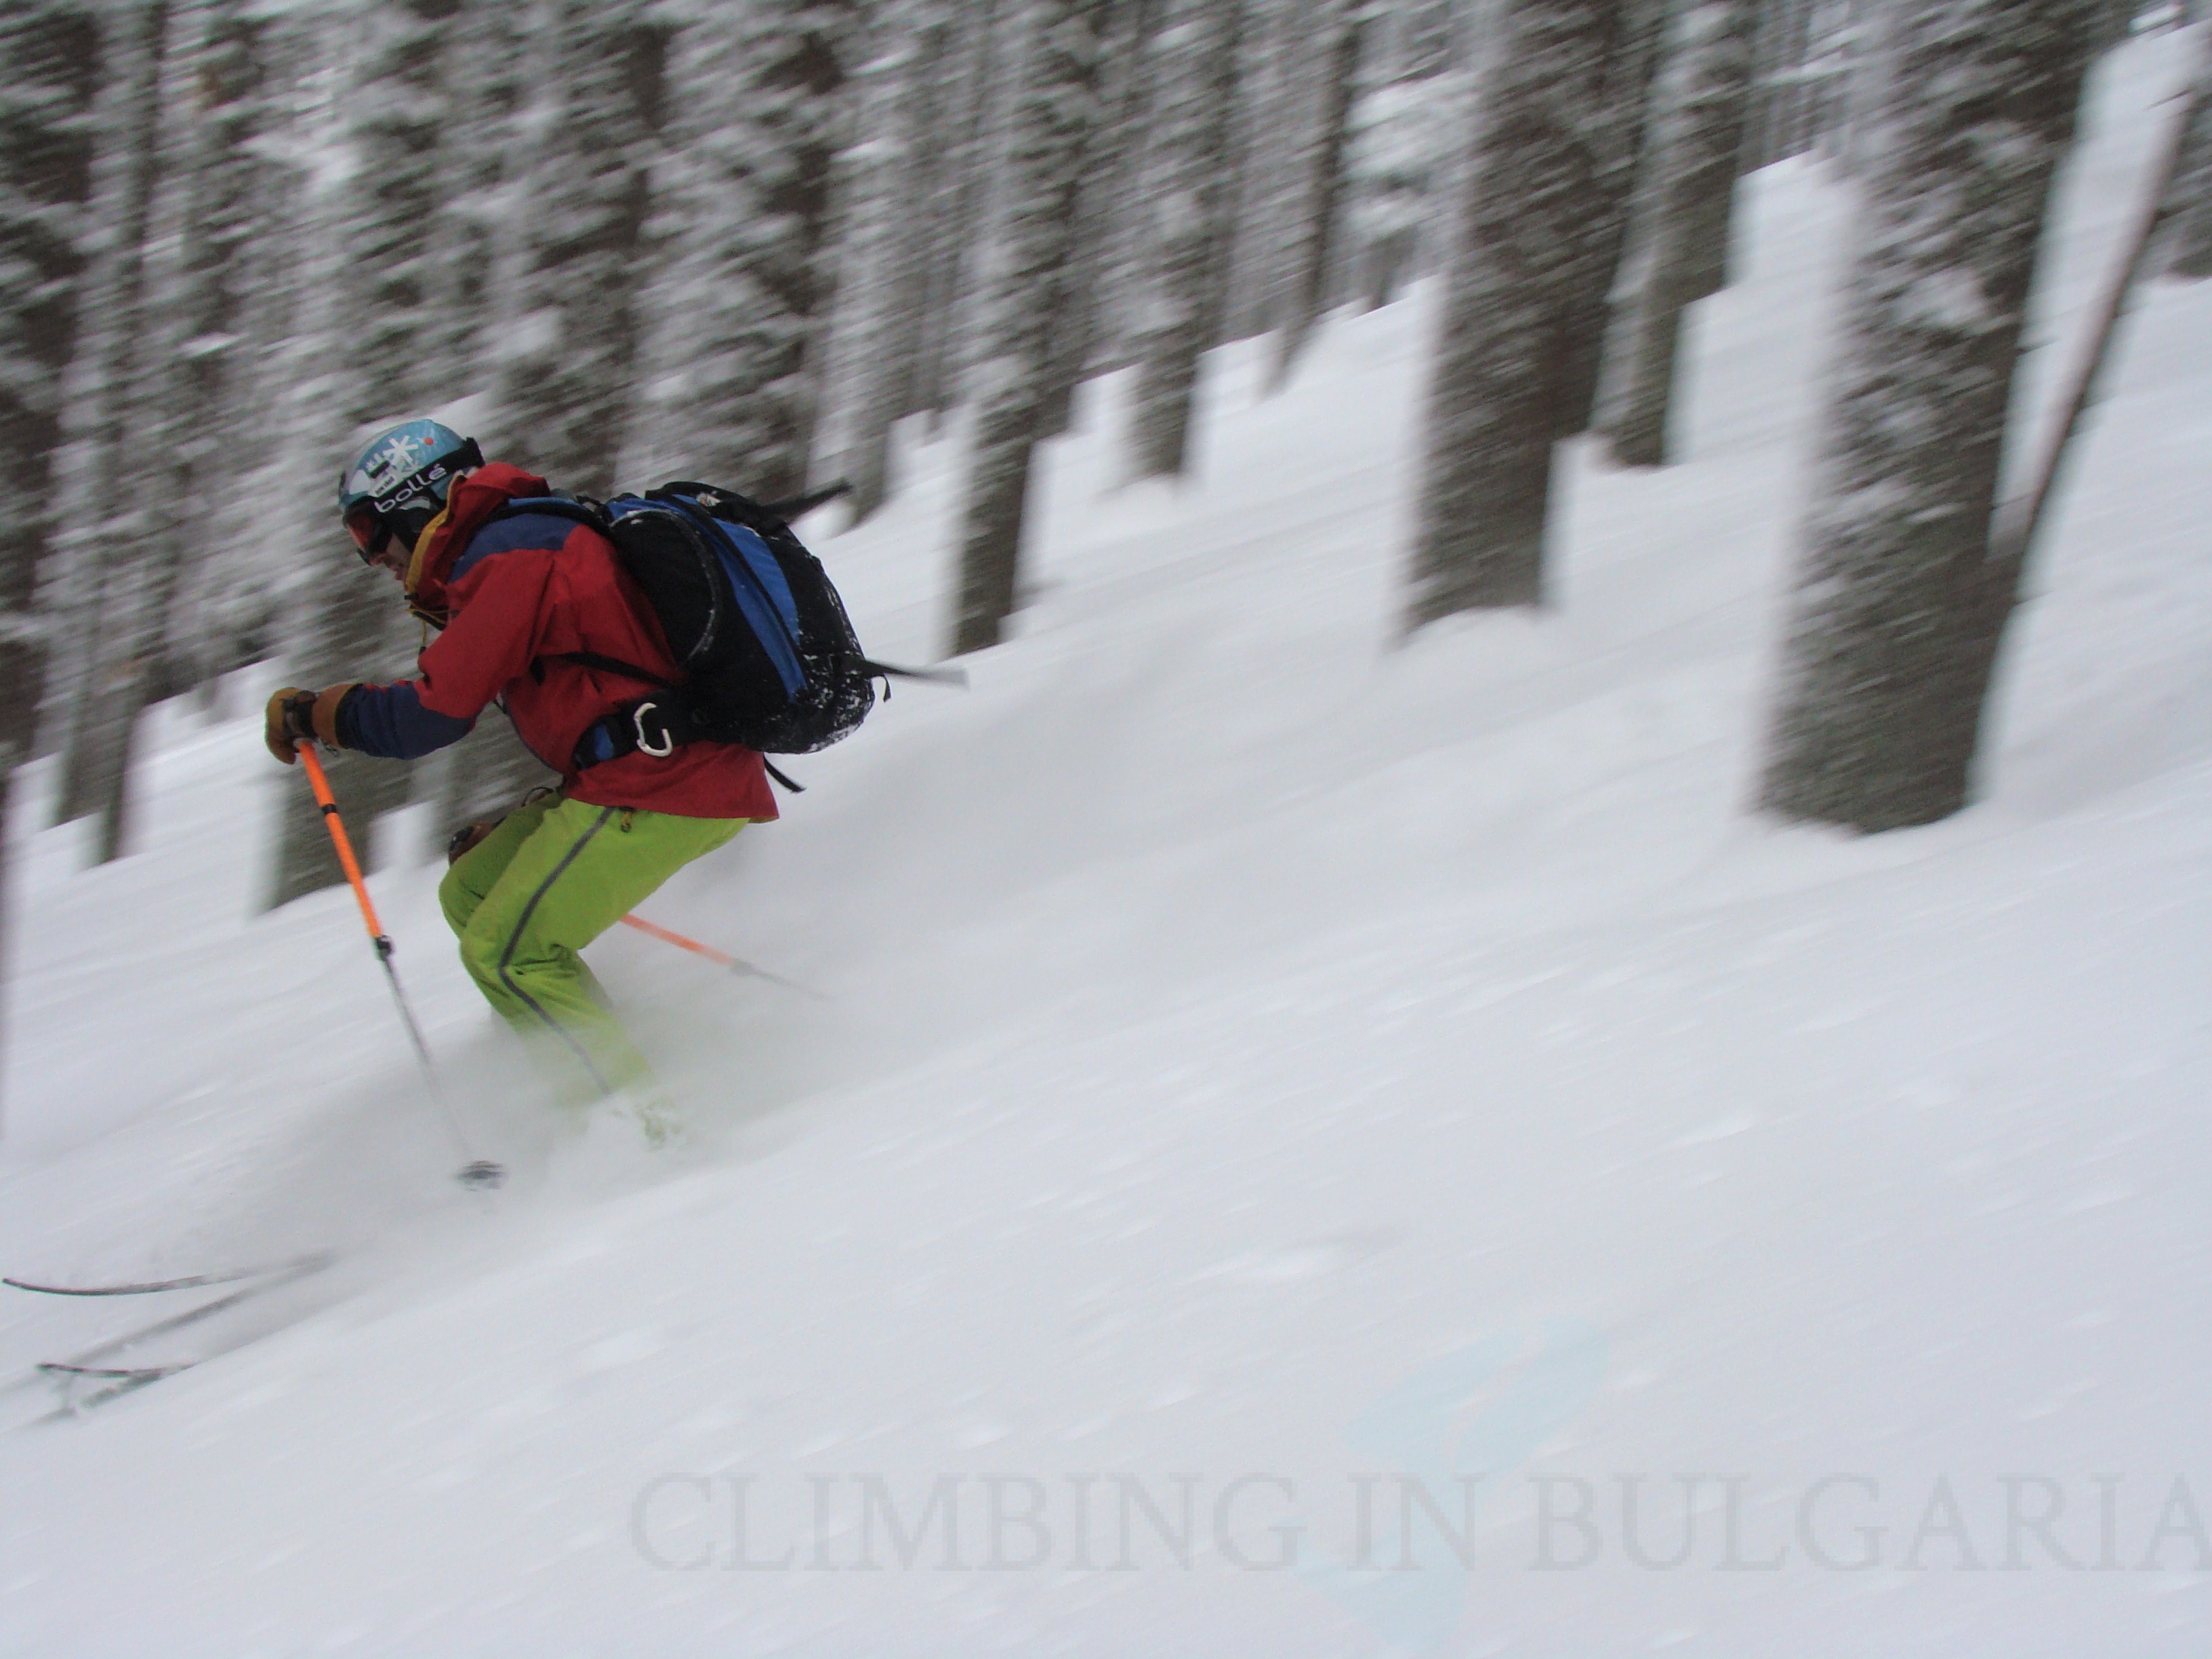 Ski riding in the forest of Pirin mountain, Backcountry skiing in Bulgaria